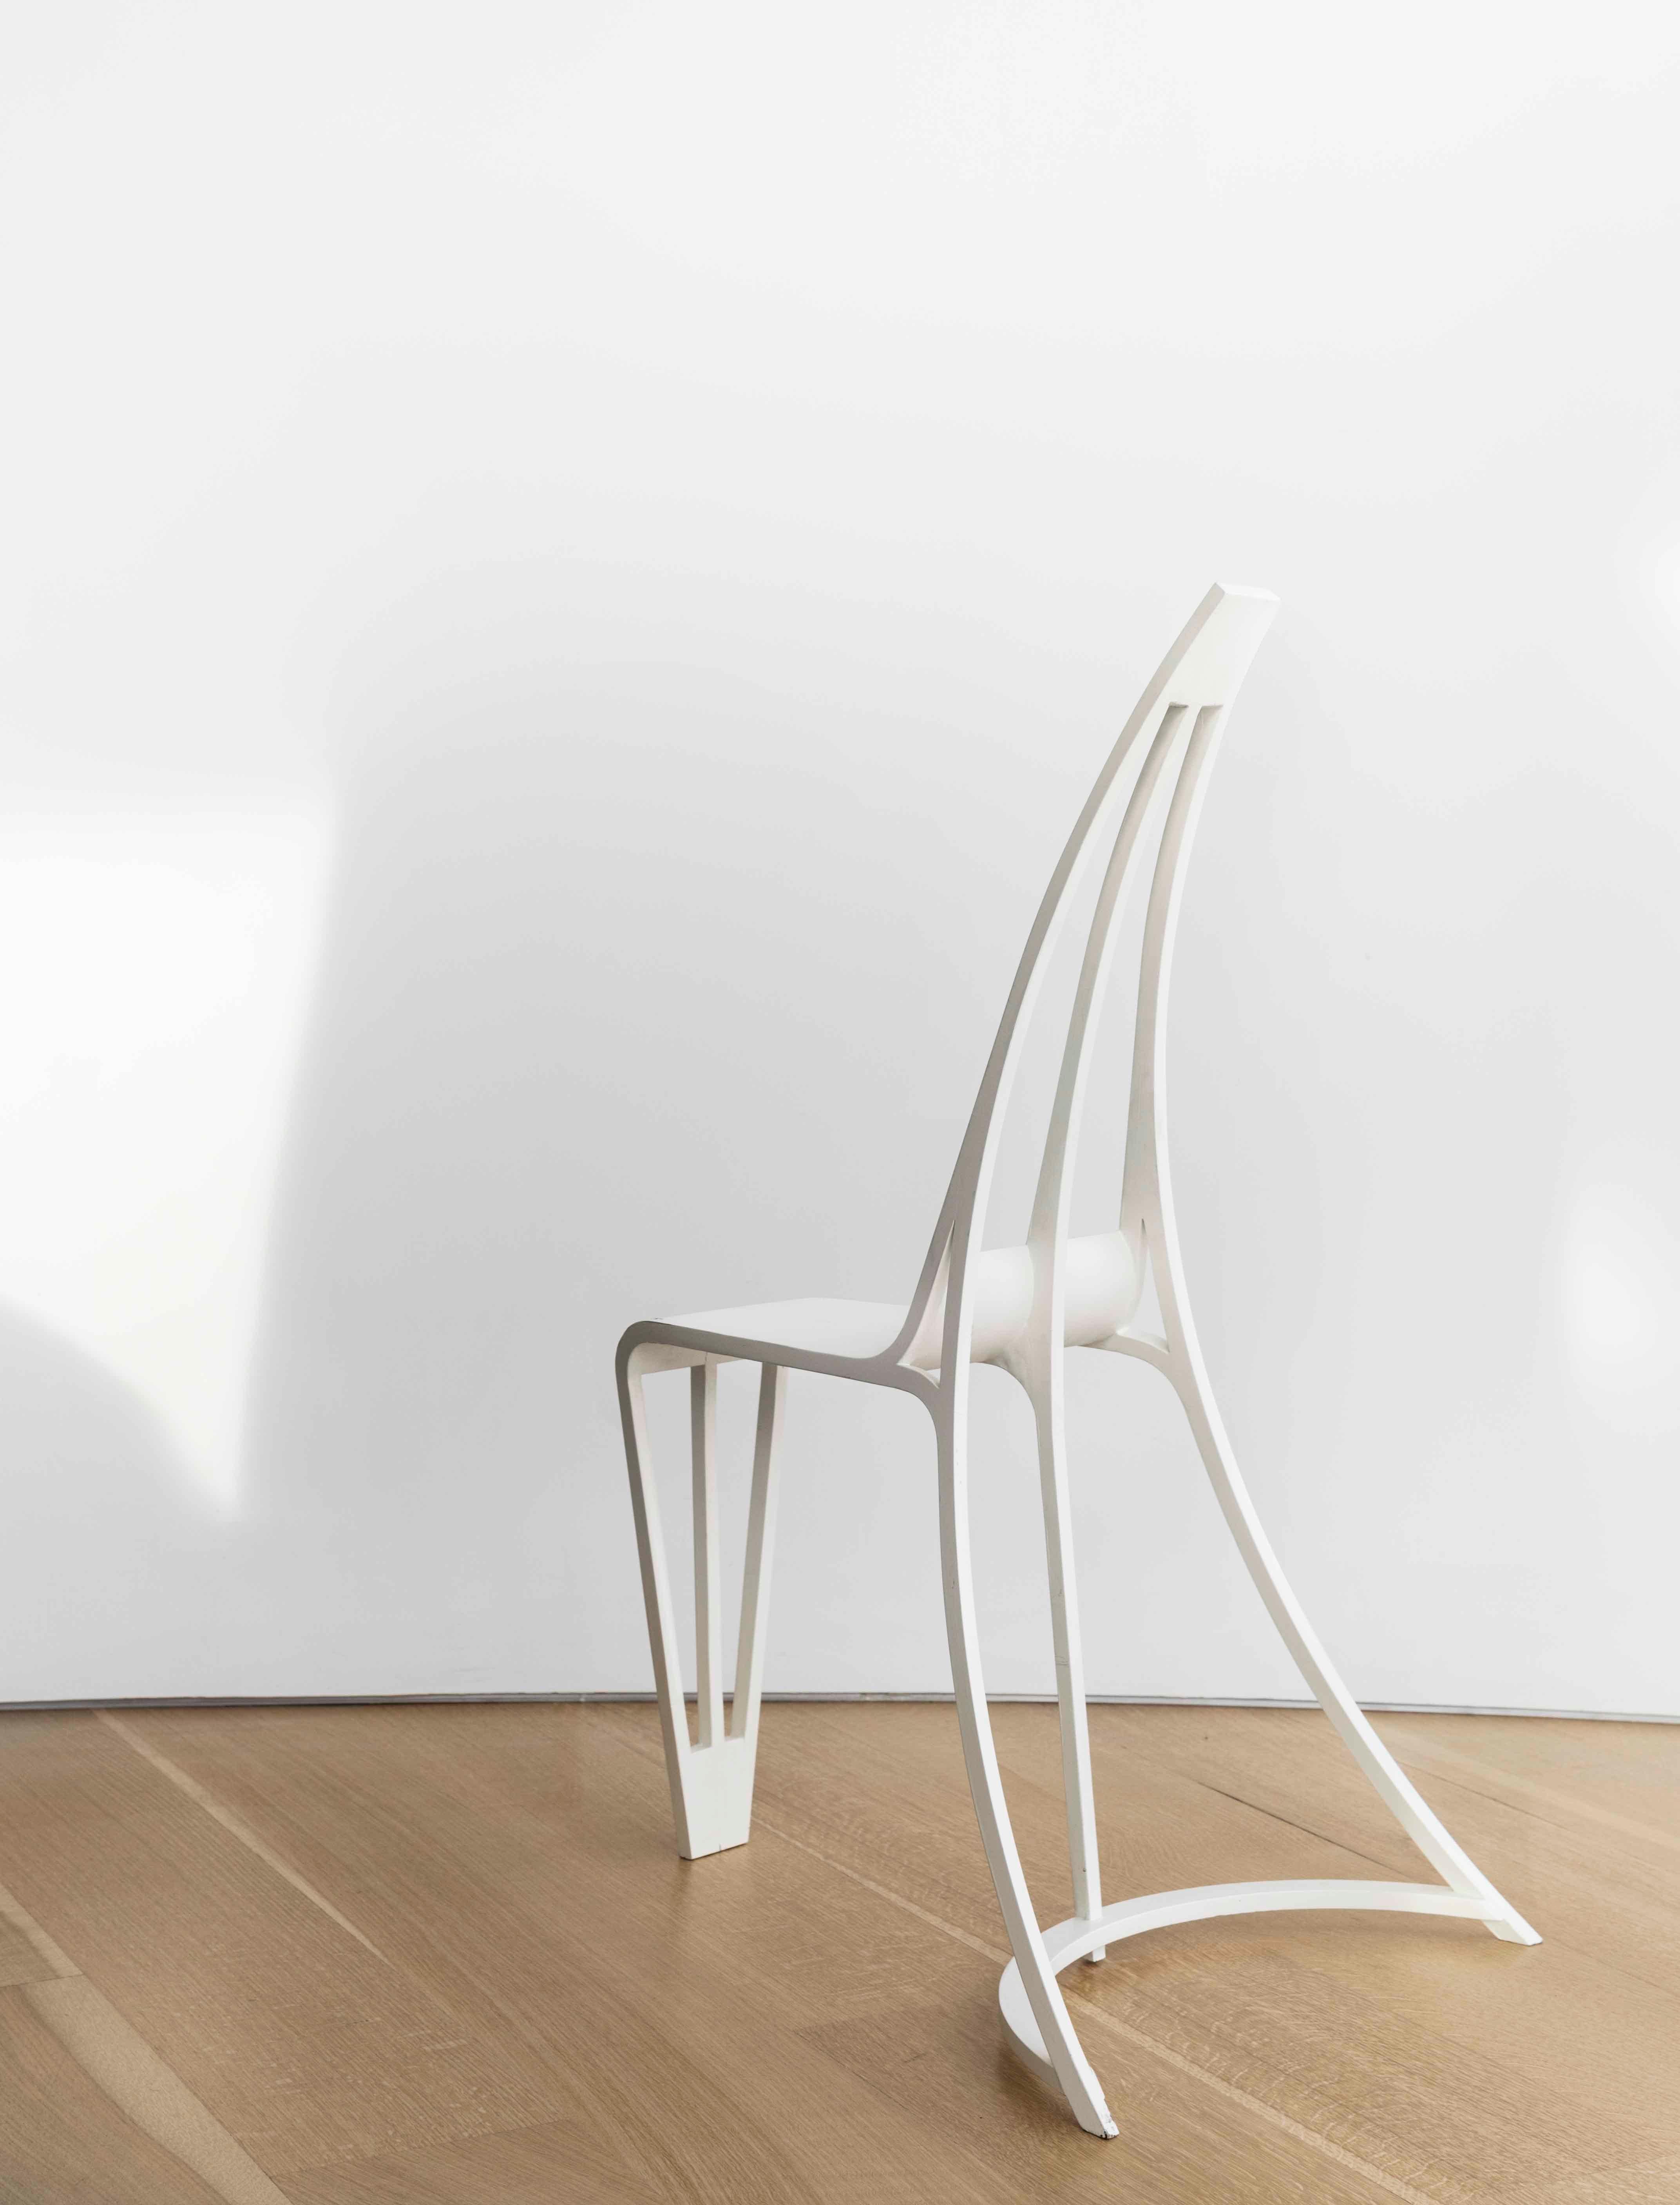 Cape chair belongs to the Arctic Line, influenced by Nina’s years living in Norway where she was inspired by organic forms found in the ice and snowscapes. Cape chair takes its name from the double-curved shape of its back. A single front leg is